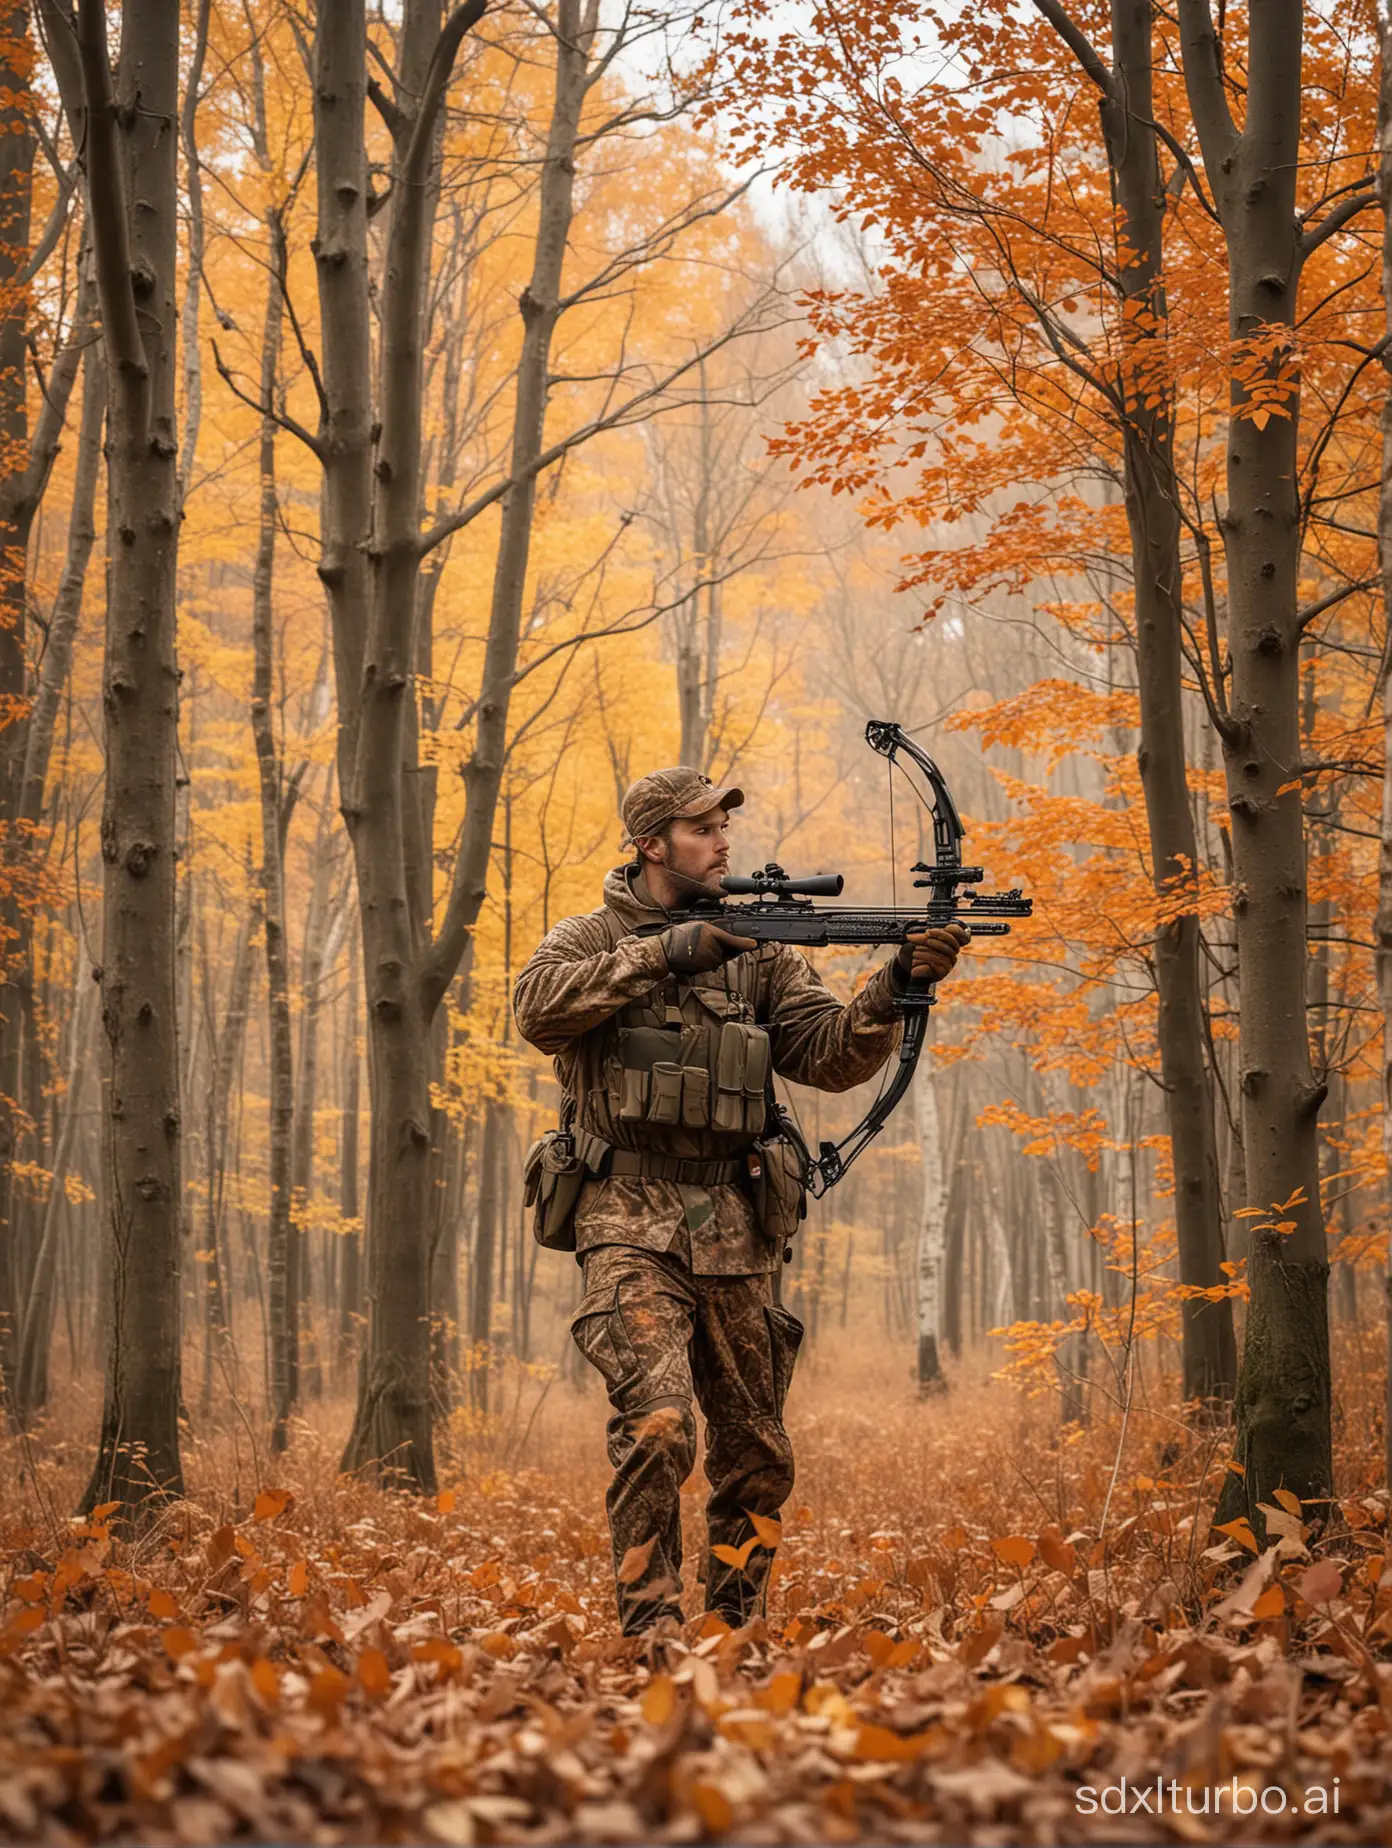 Autumn-Forest-Hunter-with-Compound-Bow-Concealed-Amidst-Vibrant-Foliage